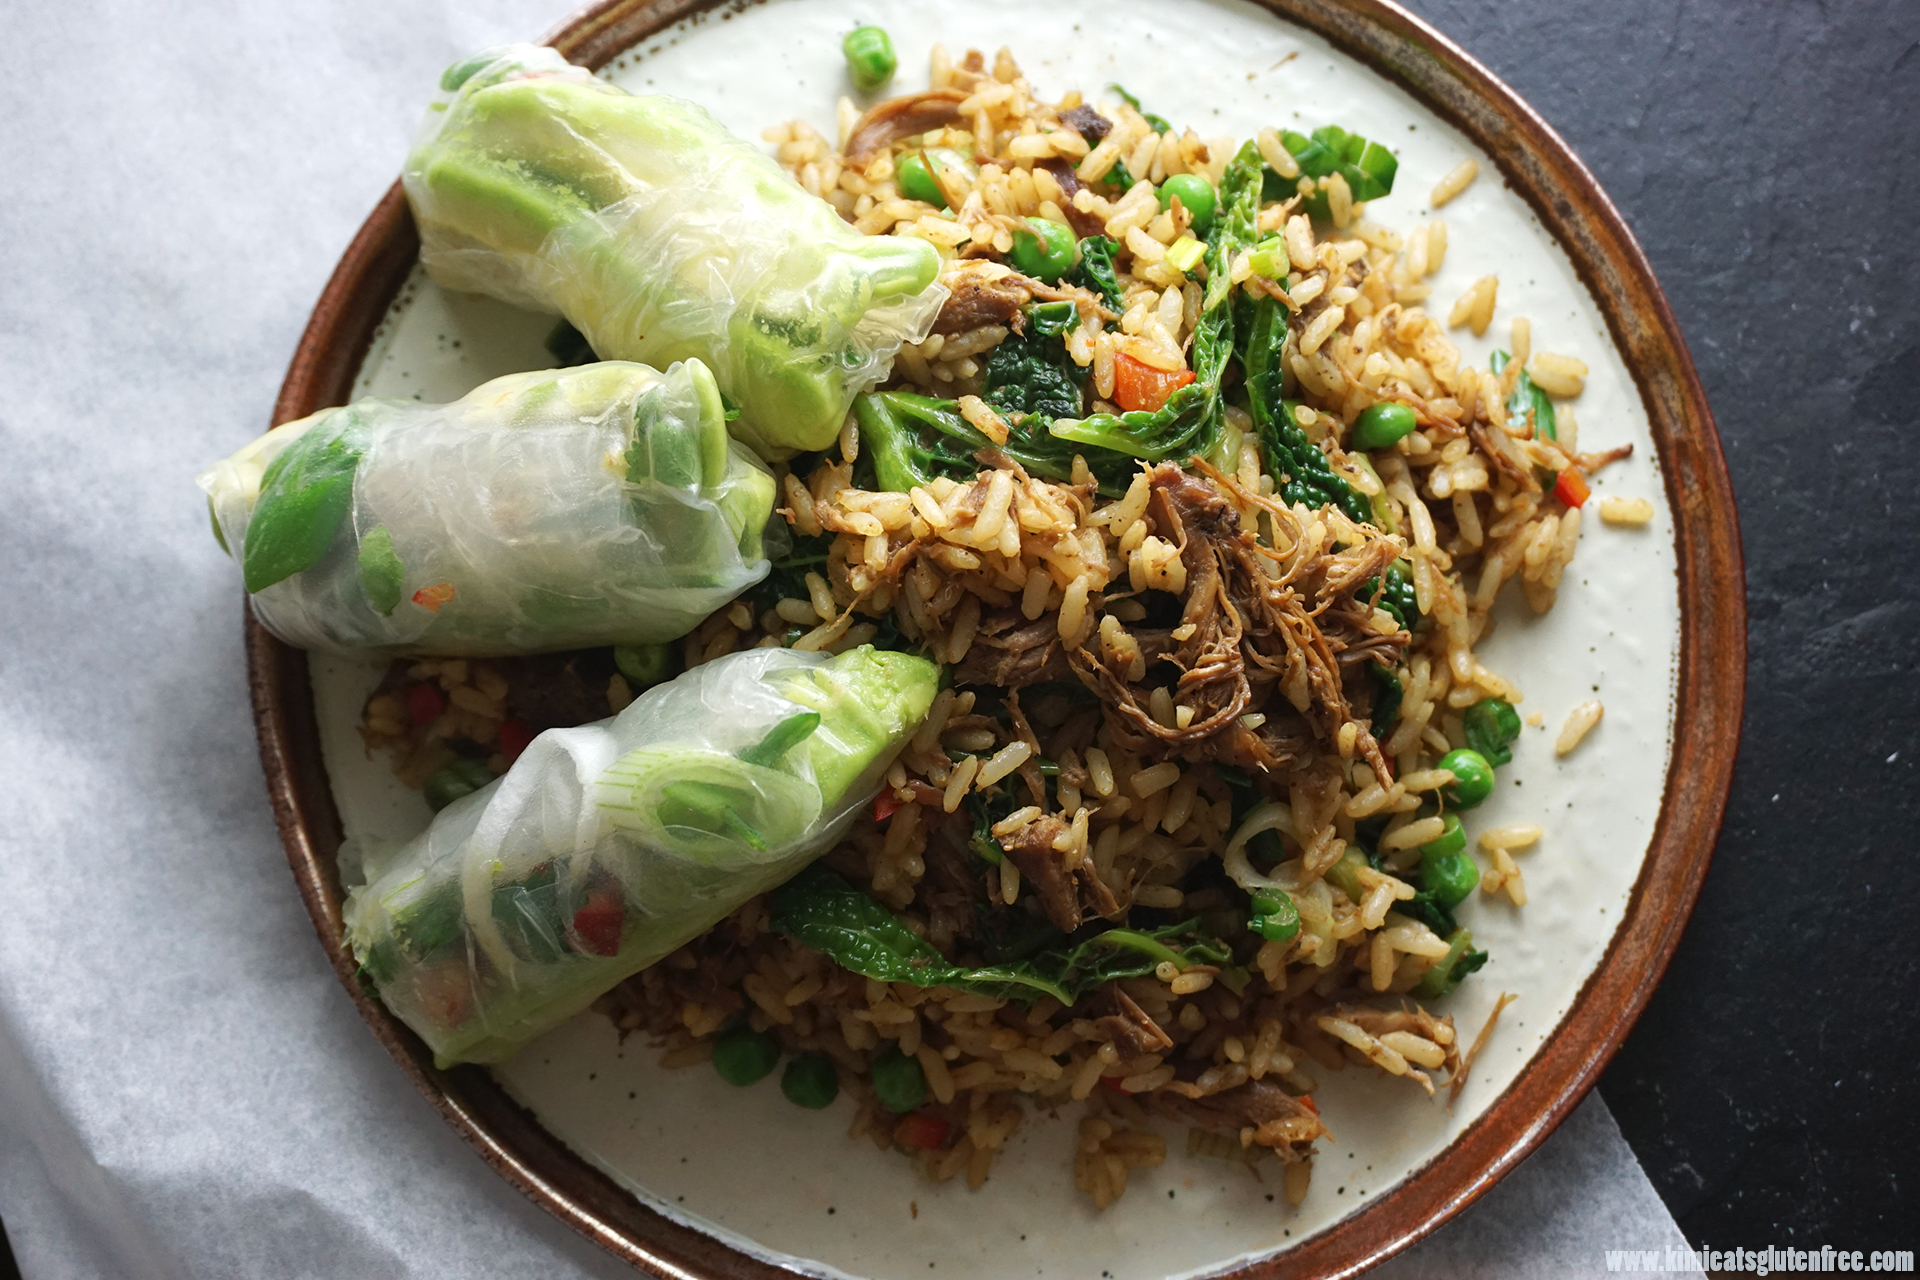 Gluten free Chinese crispy duck fried rice with fresh avocado spring rolls on the side